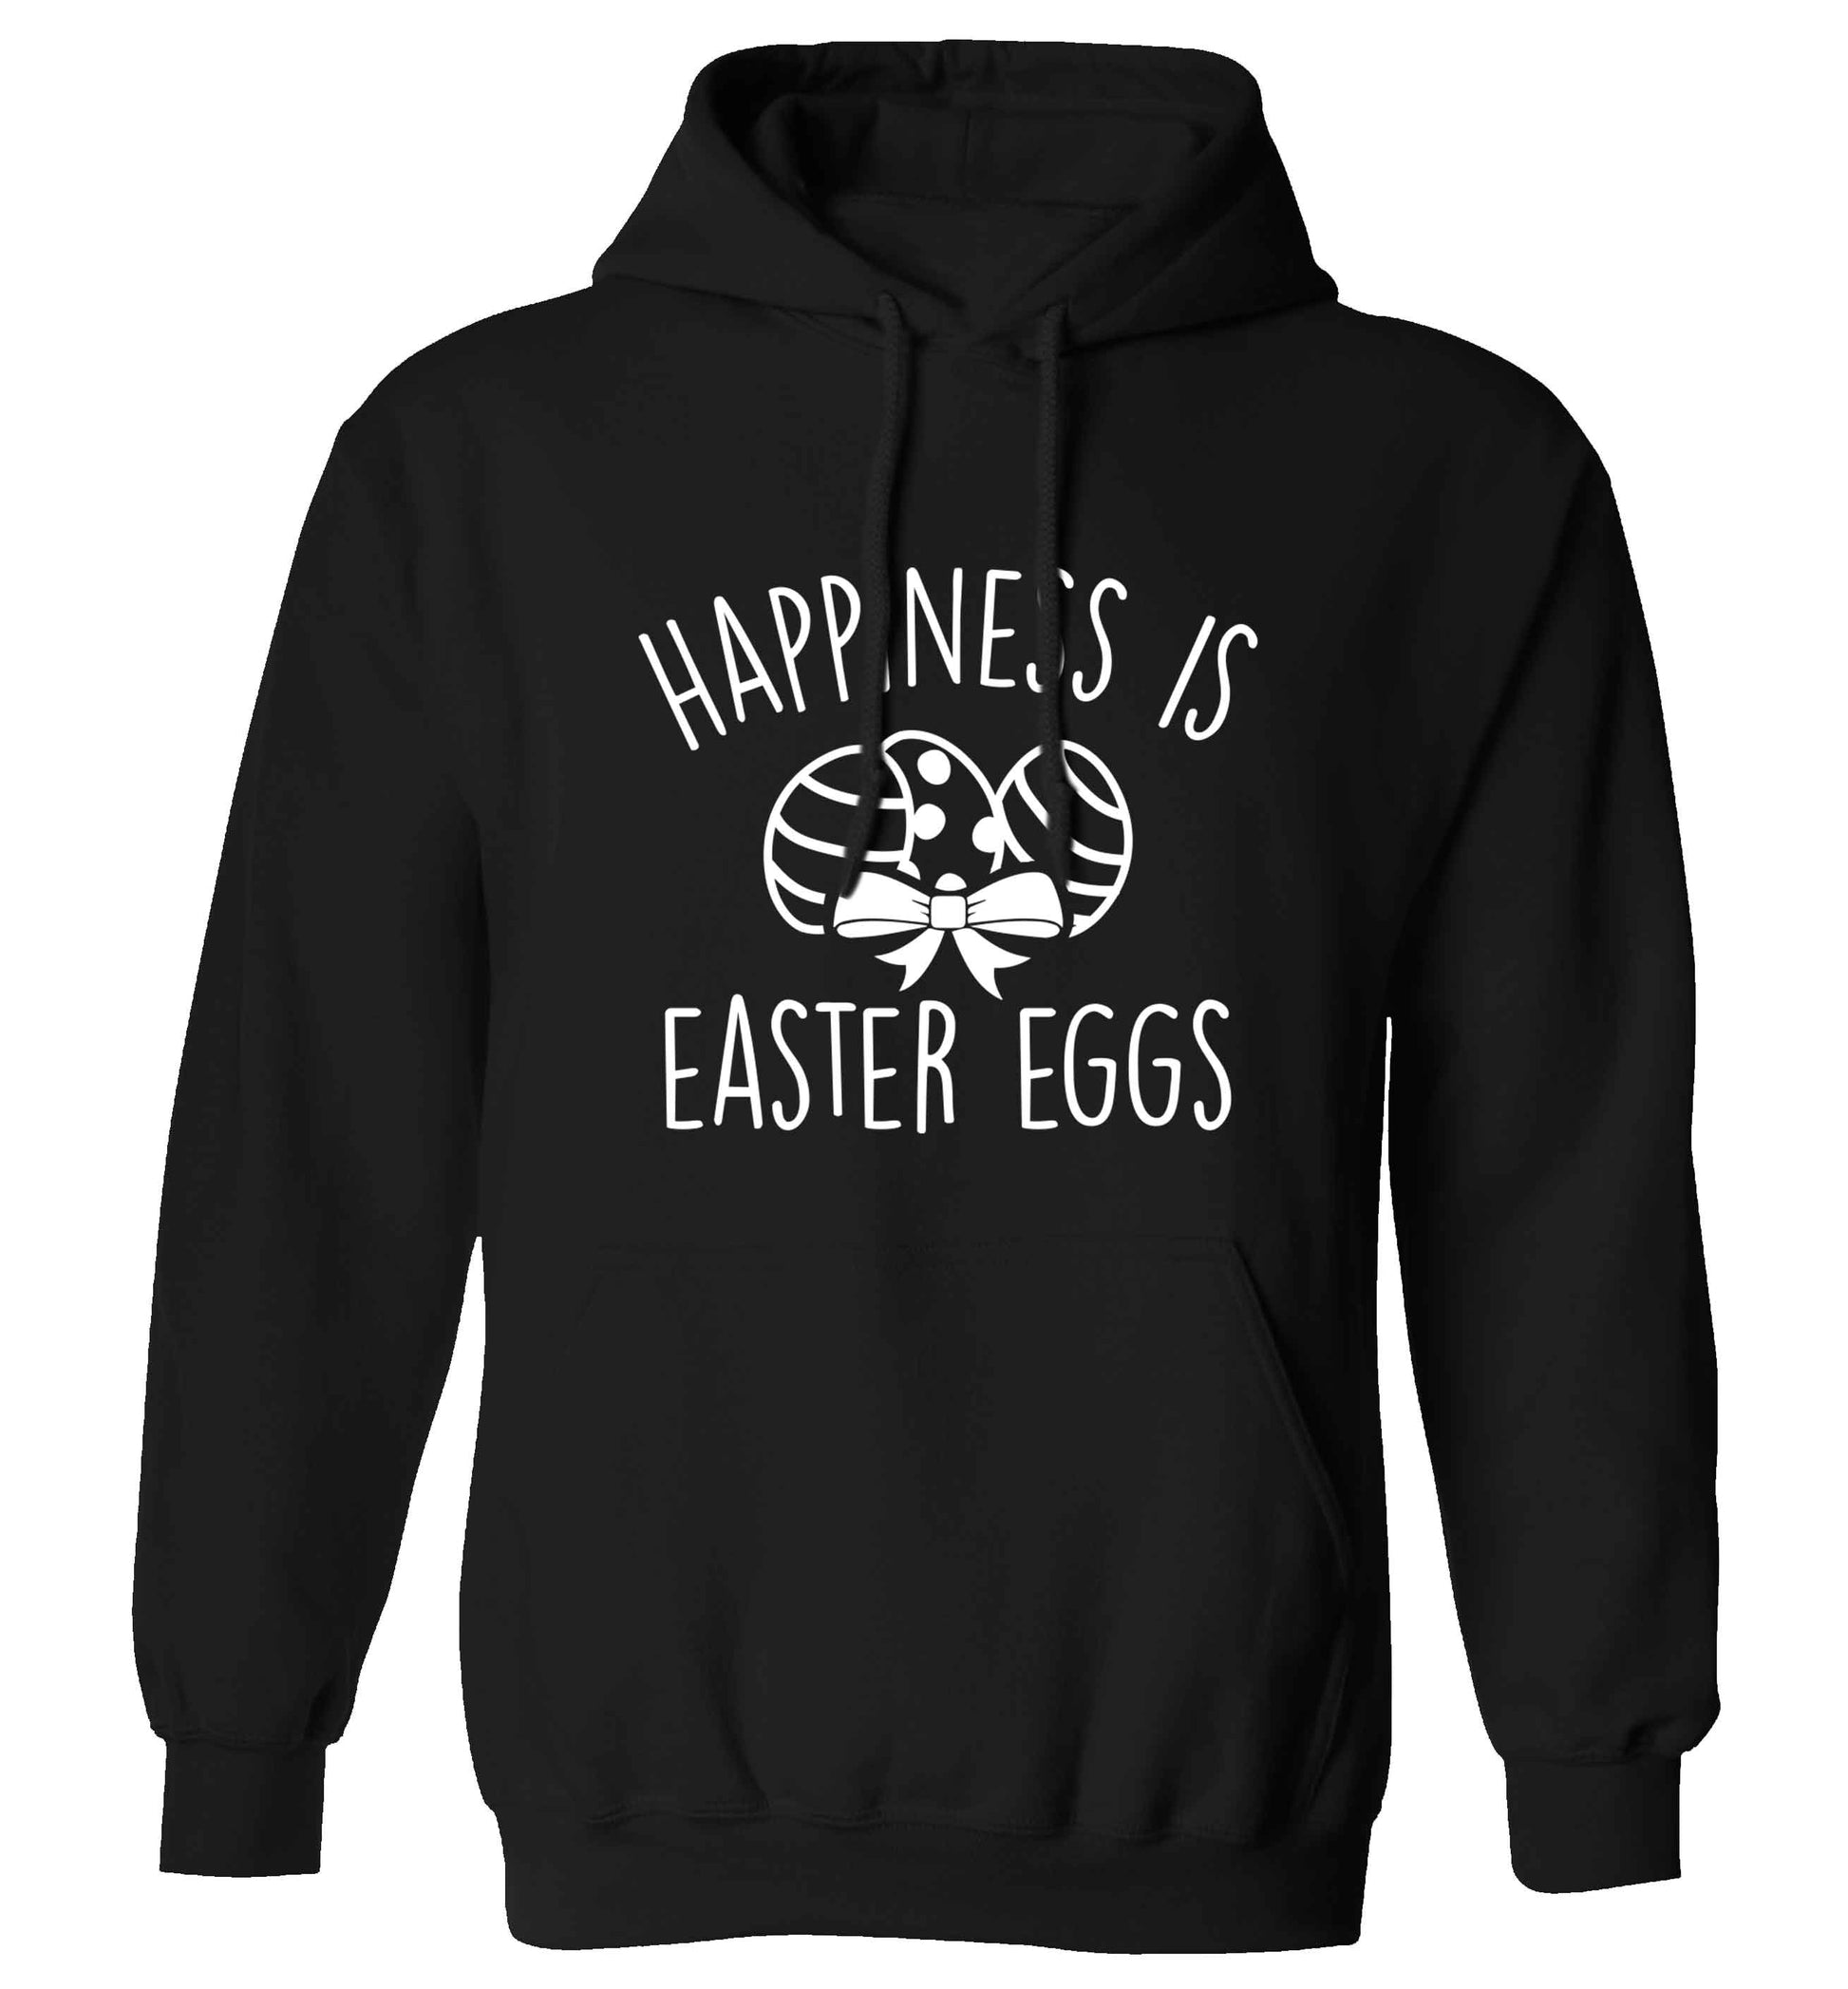 Happiness is Easter eggs adults unisex black hoodie 2XL